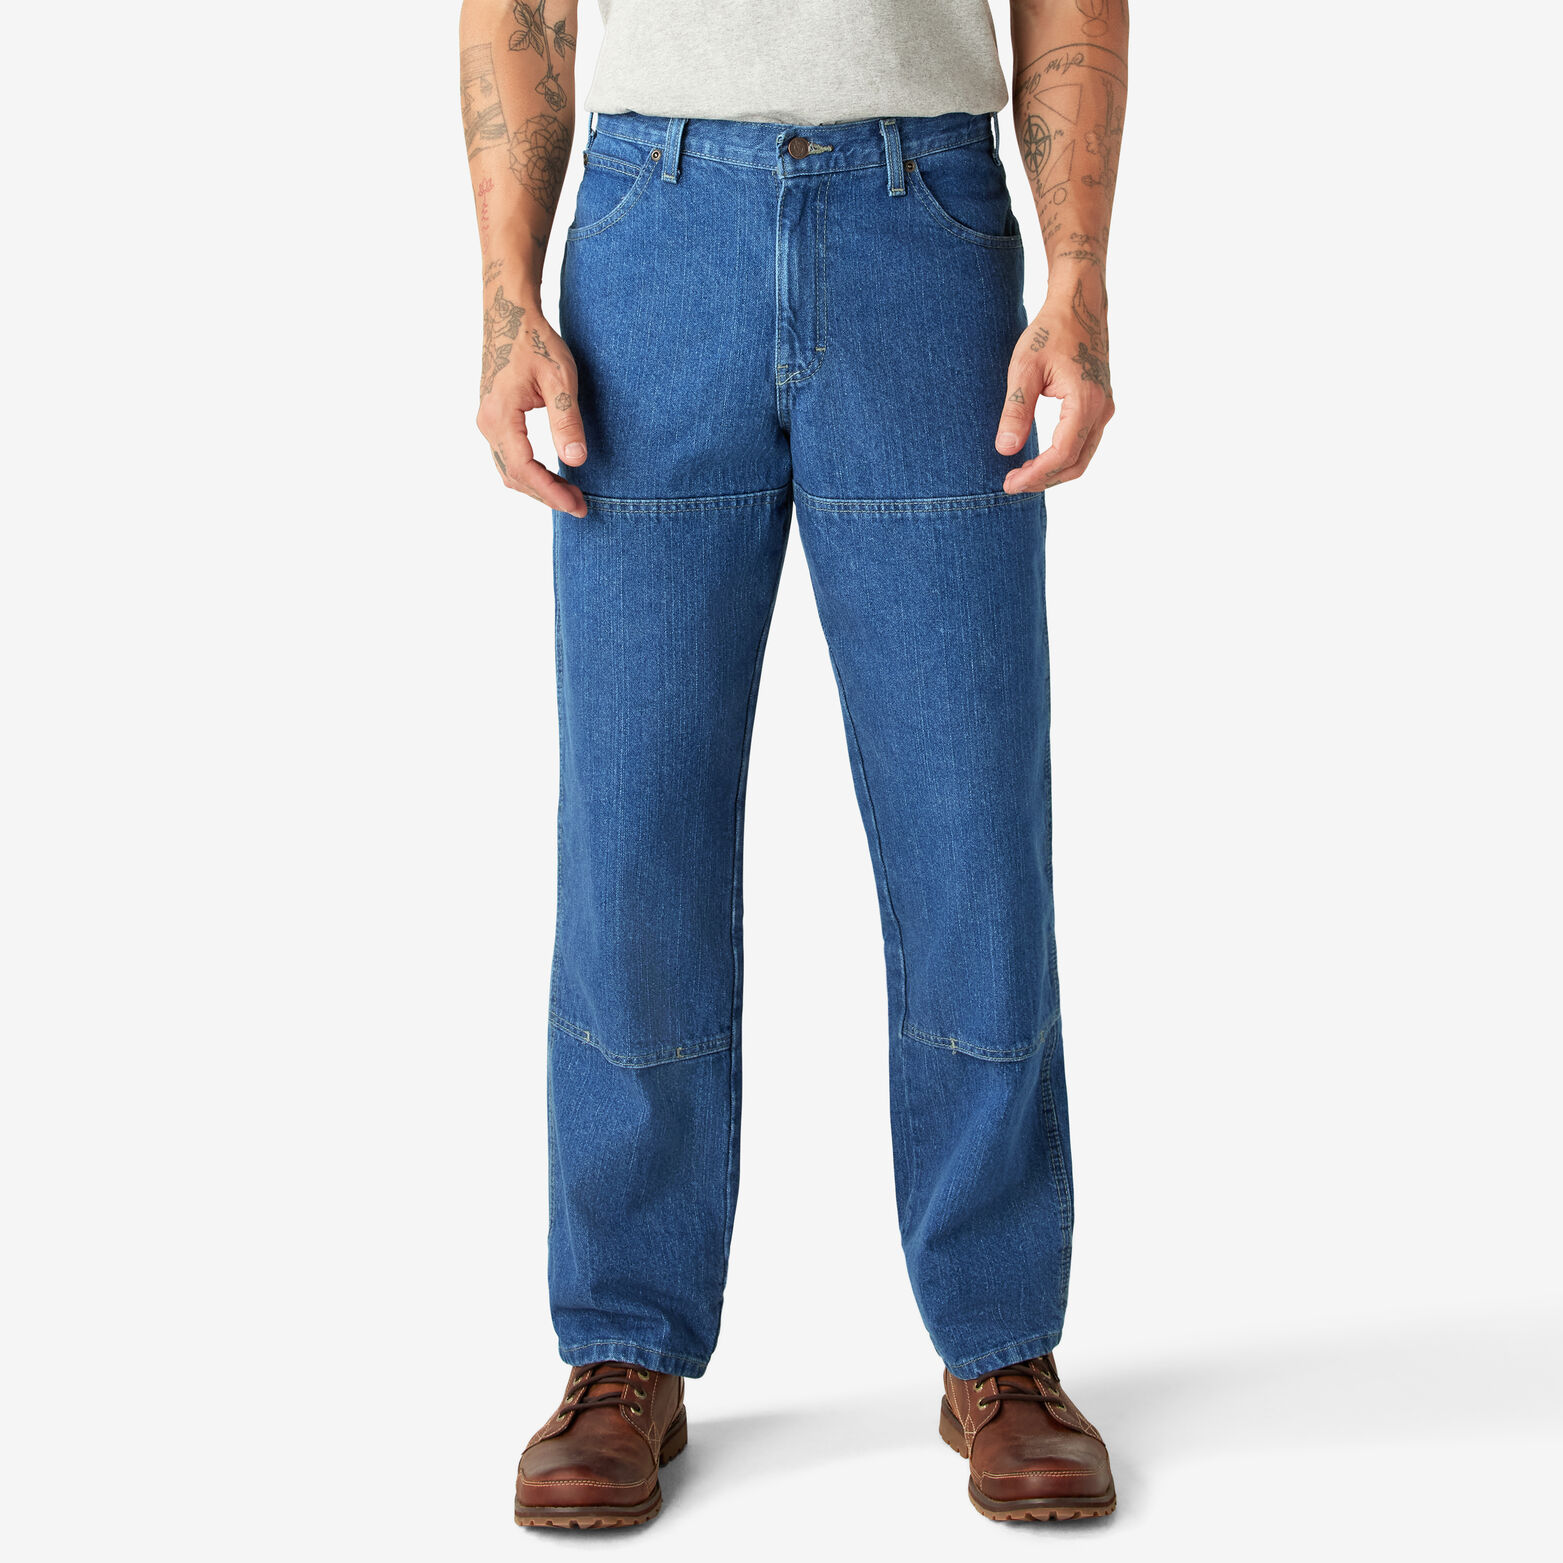 Relaxed Fit Workhorse Denim Jeans - Stonewashed | Mens Jeans | Dickies